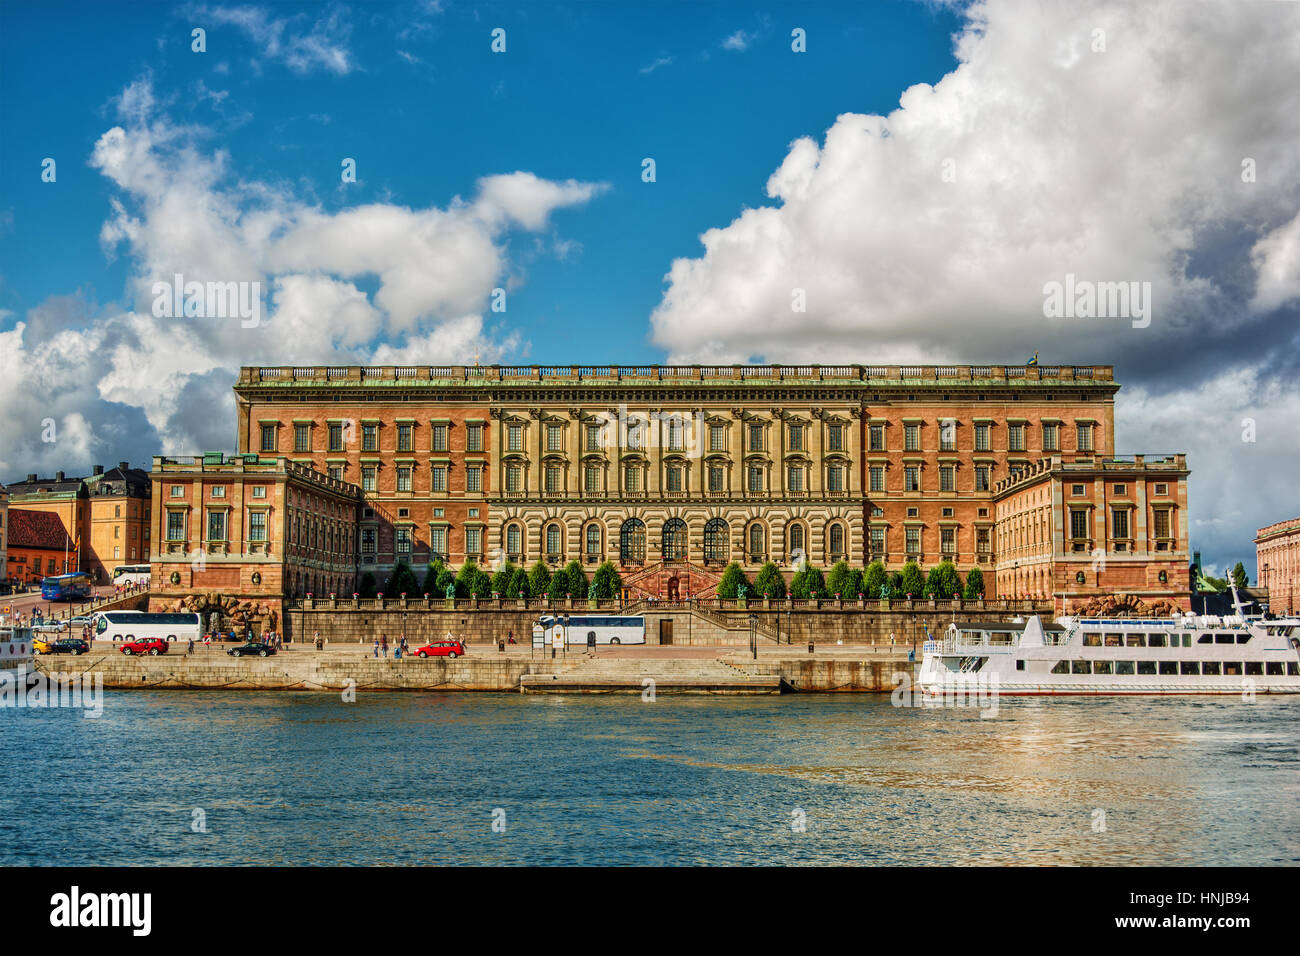 The Royal Palace (Kungliga slottet) in Stockholm (Sweden), HDR-technique Stock Photo